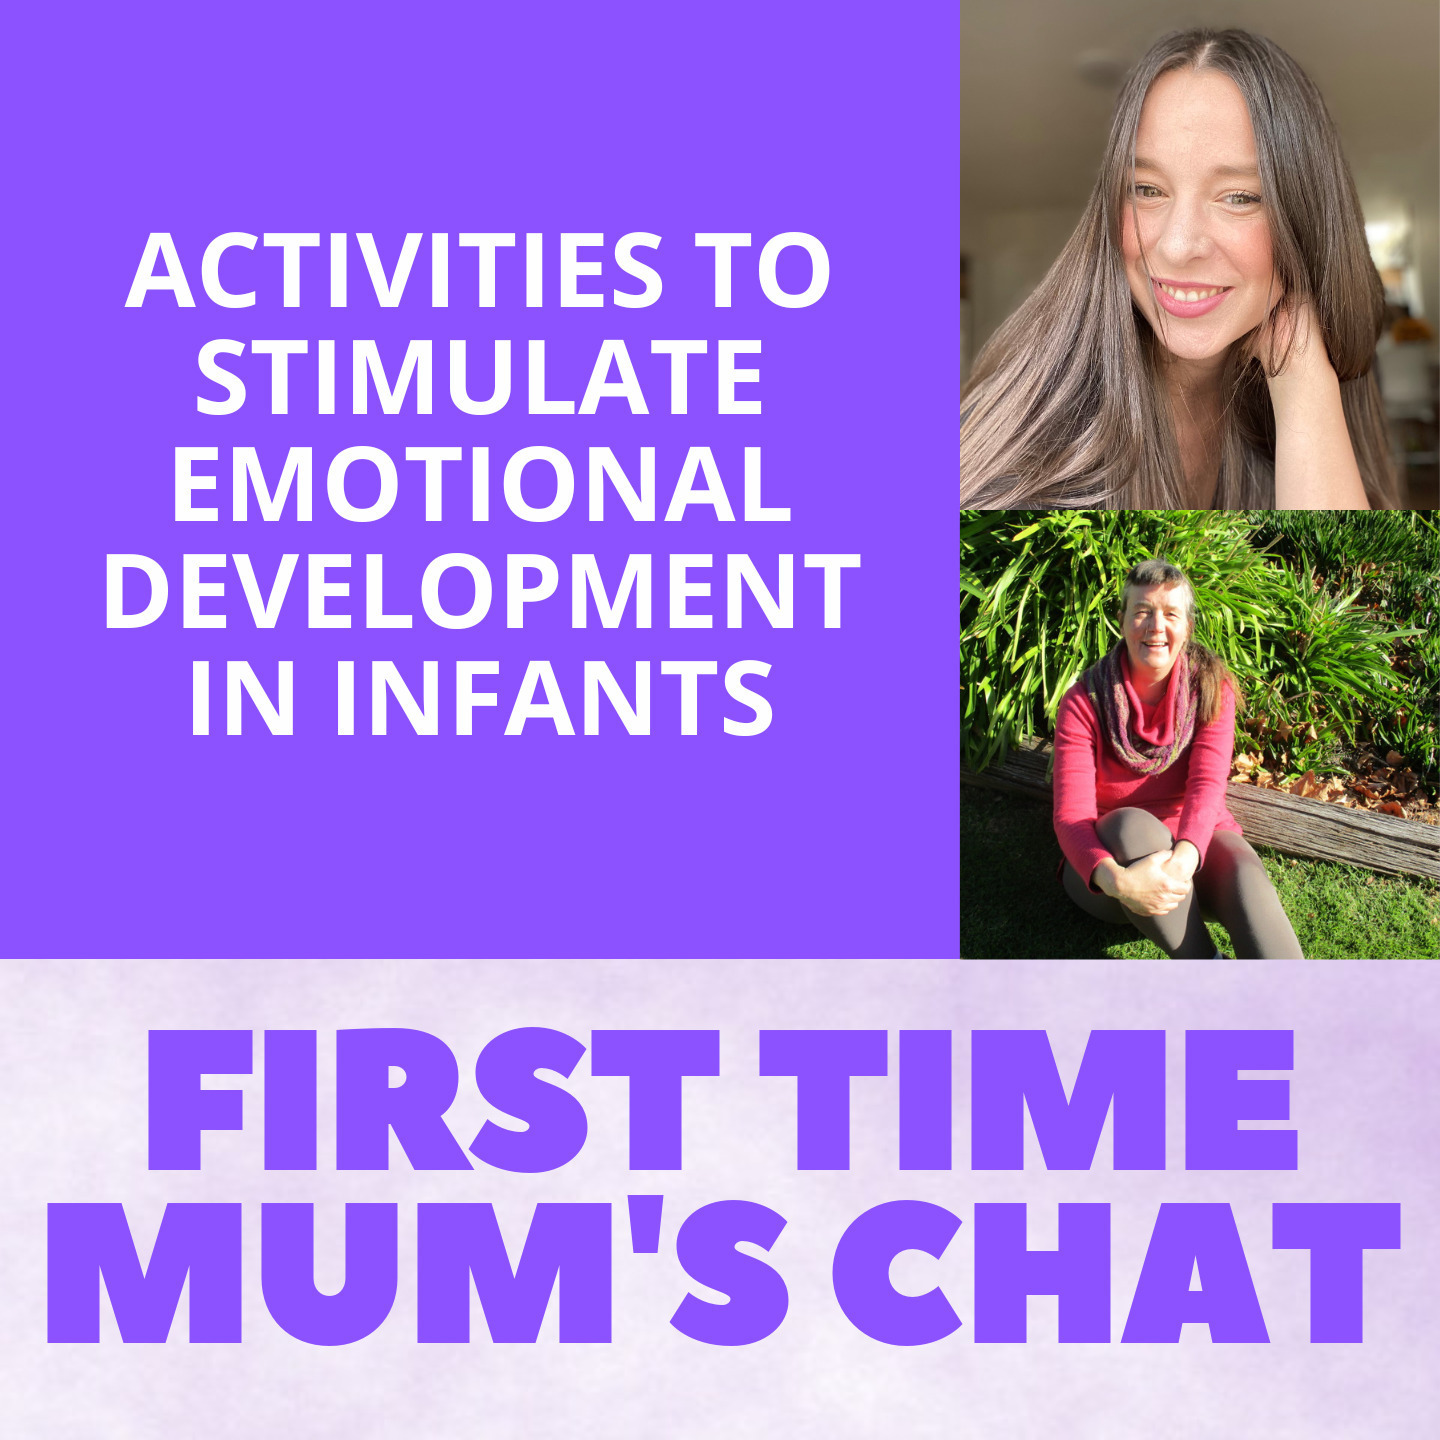 Activities to Stimulate Emotional Development in Infants